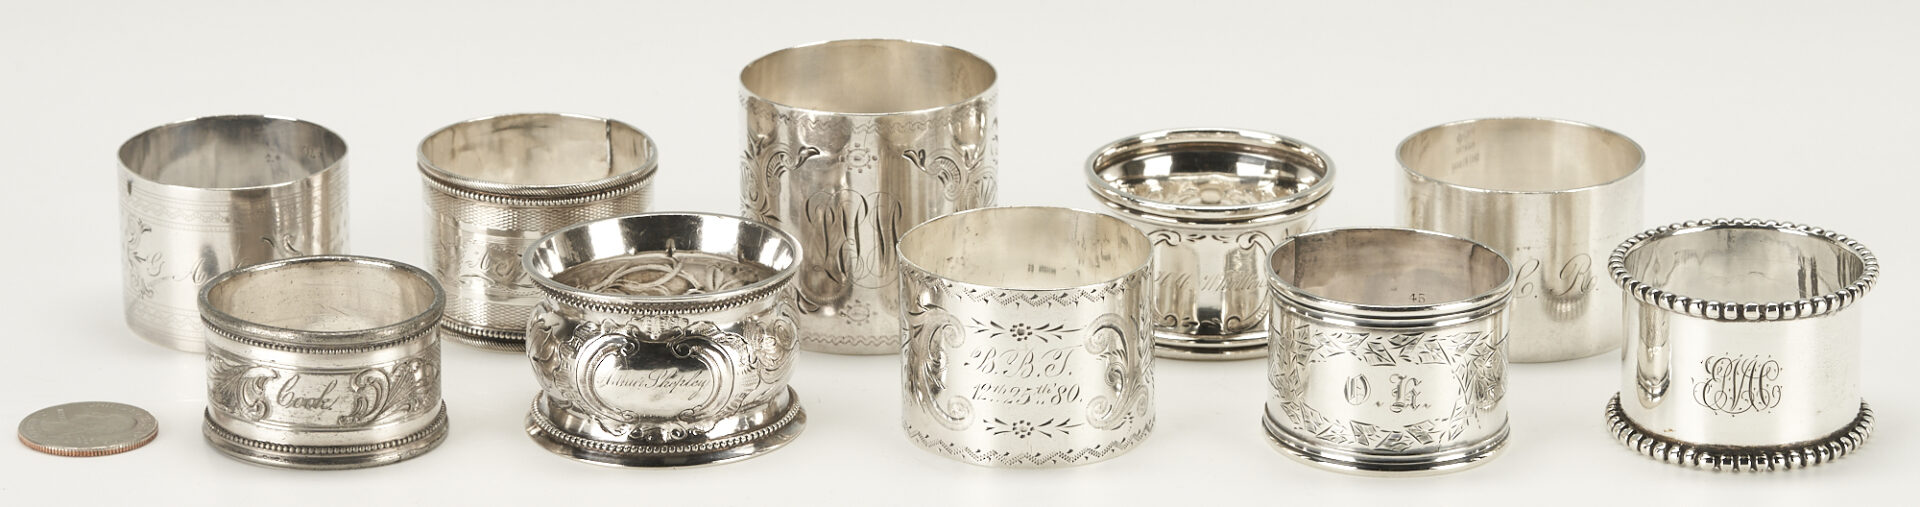 Lot 1106: 10 Antique Silver Napkin Rings